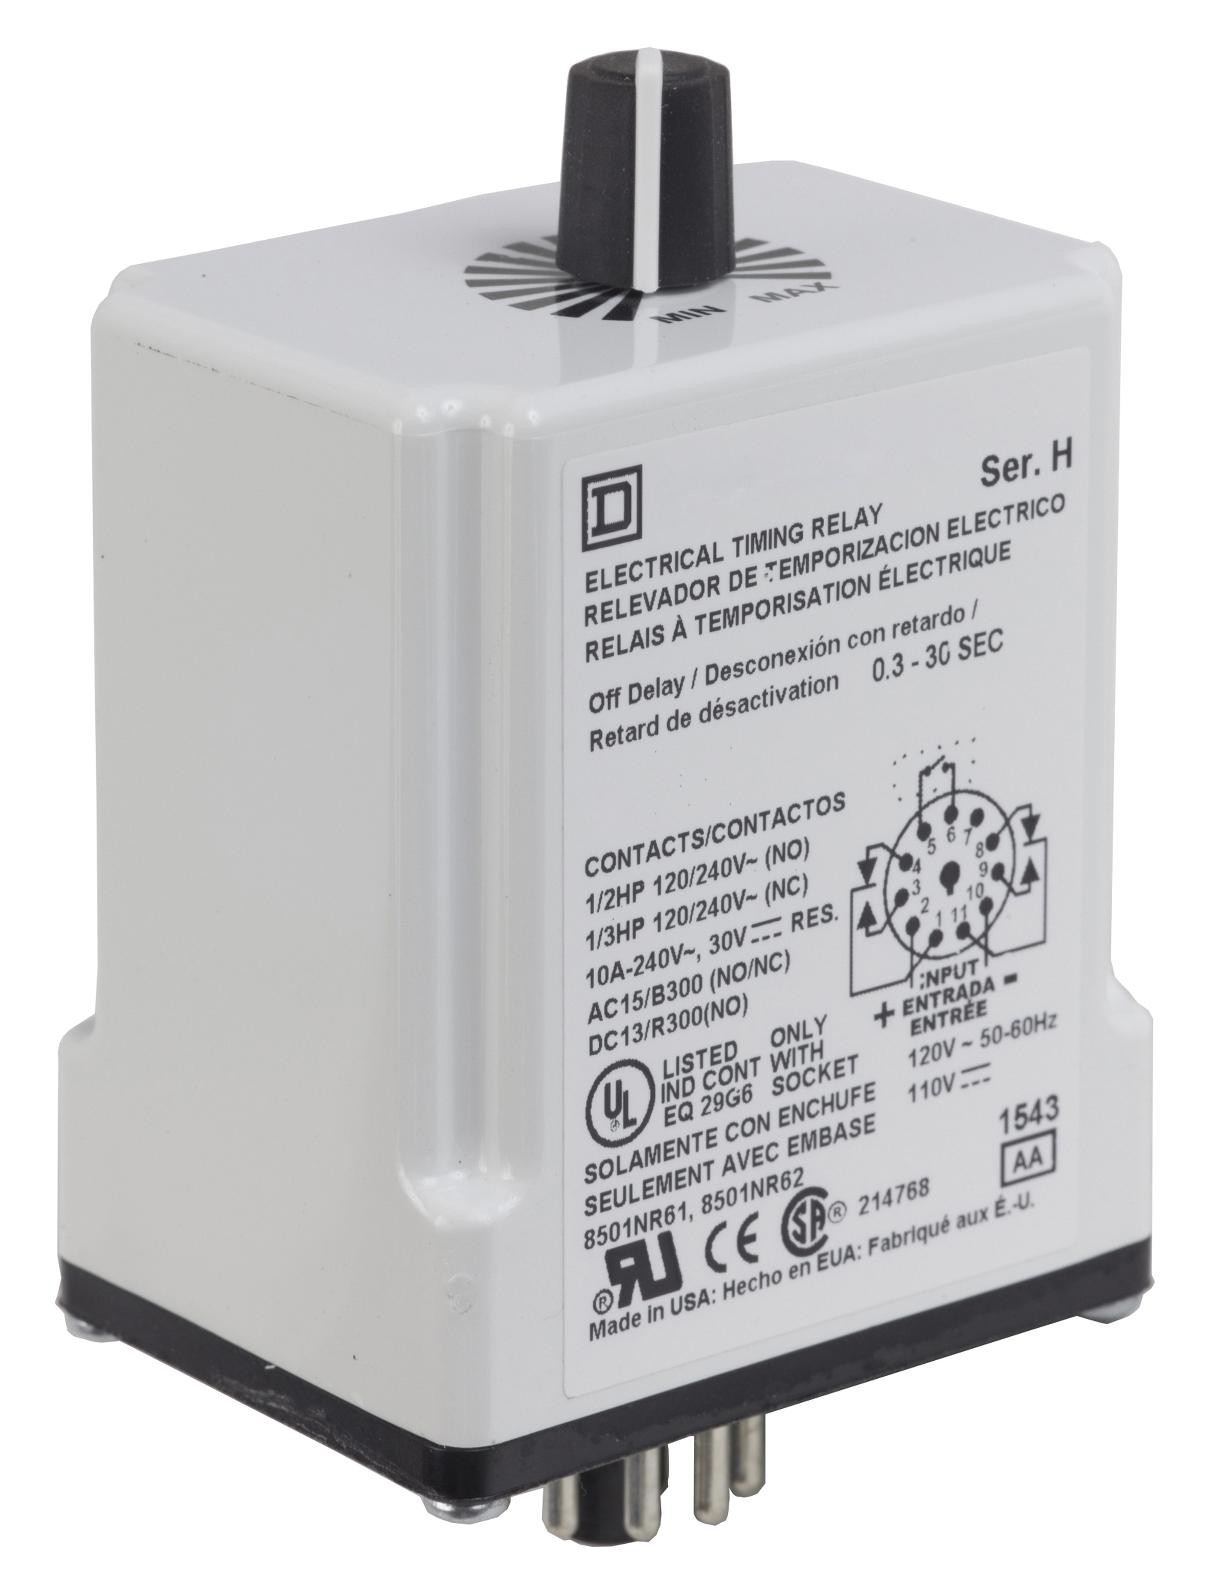 Square D By Schneider Electric 9050Jck24V20 Time Delay Relay, Dpdt, 1.2S-102S/120Vac